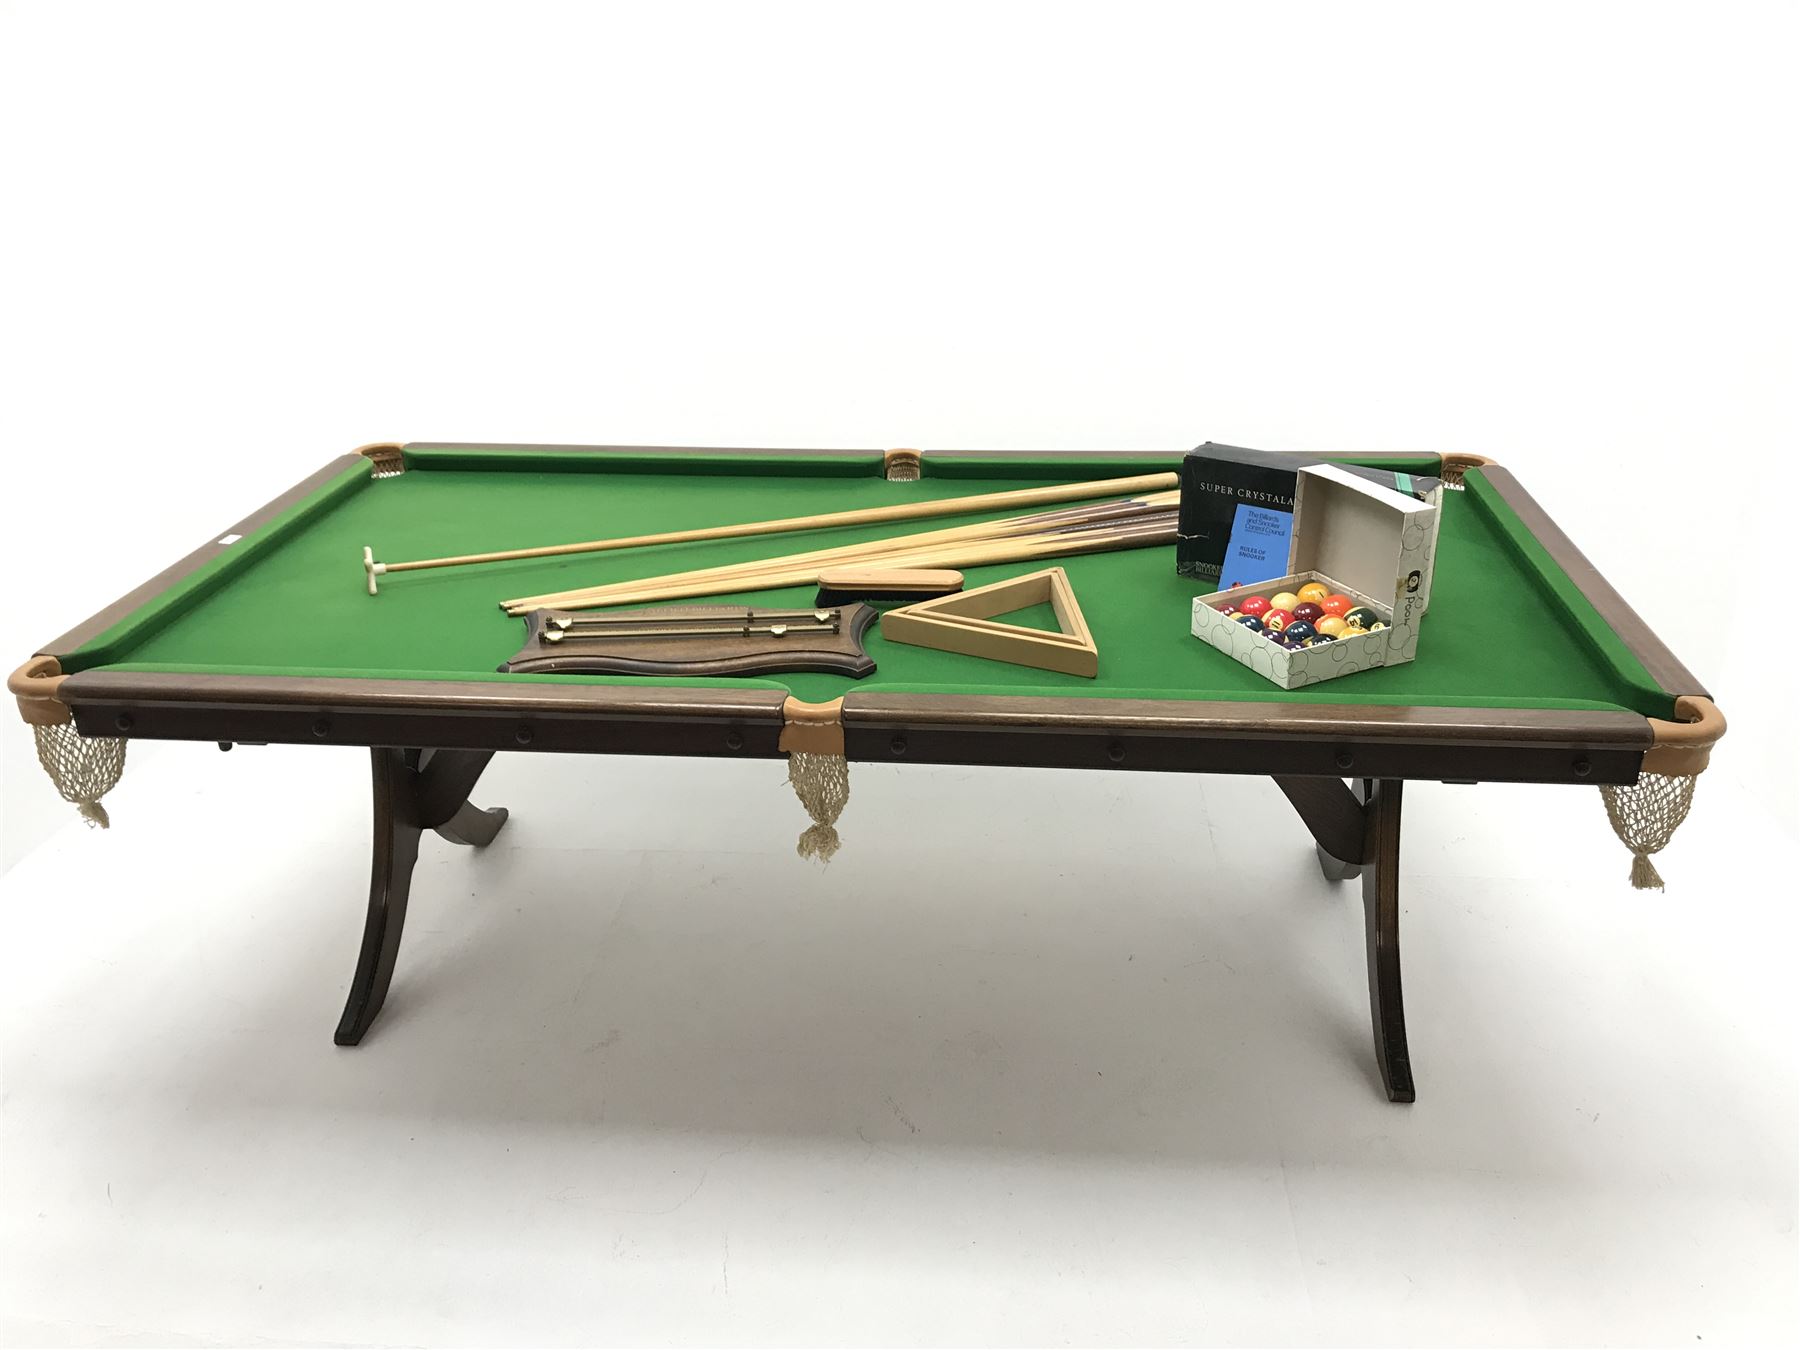 Allied Billiards slate bed snooker dining table - Image 2 of 7